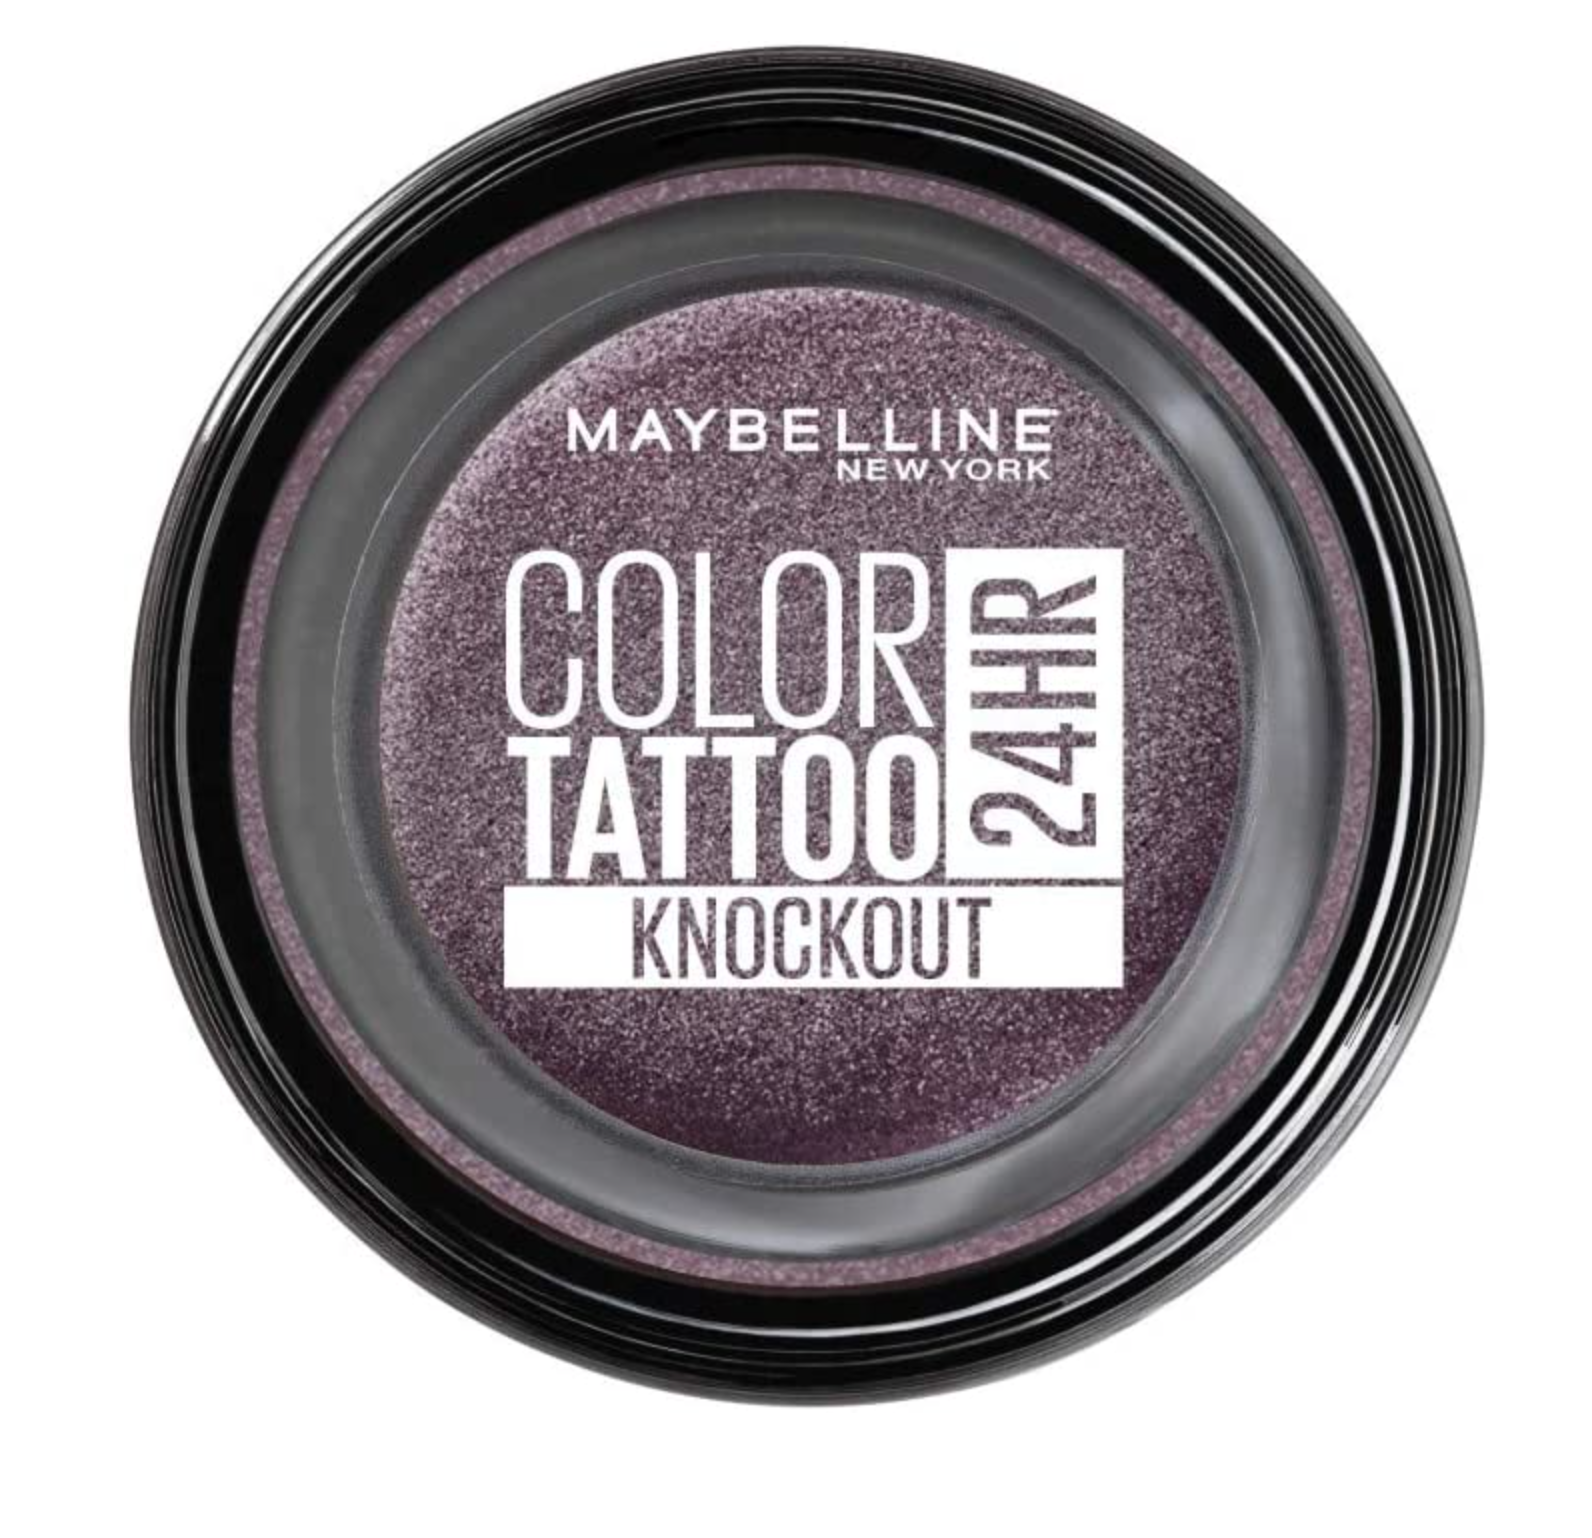 Maybelline Color Tattoo Eyeshadow 24H - Knockout